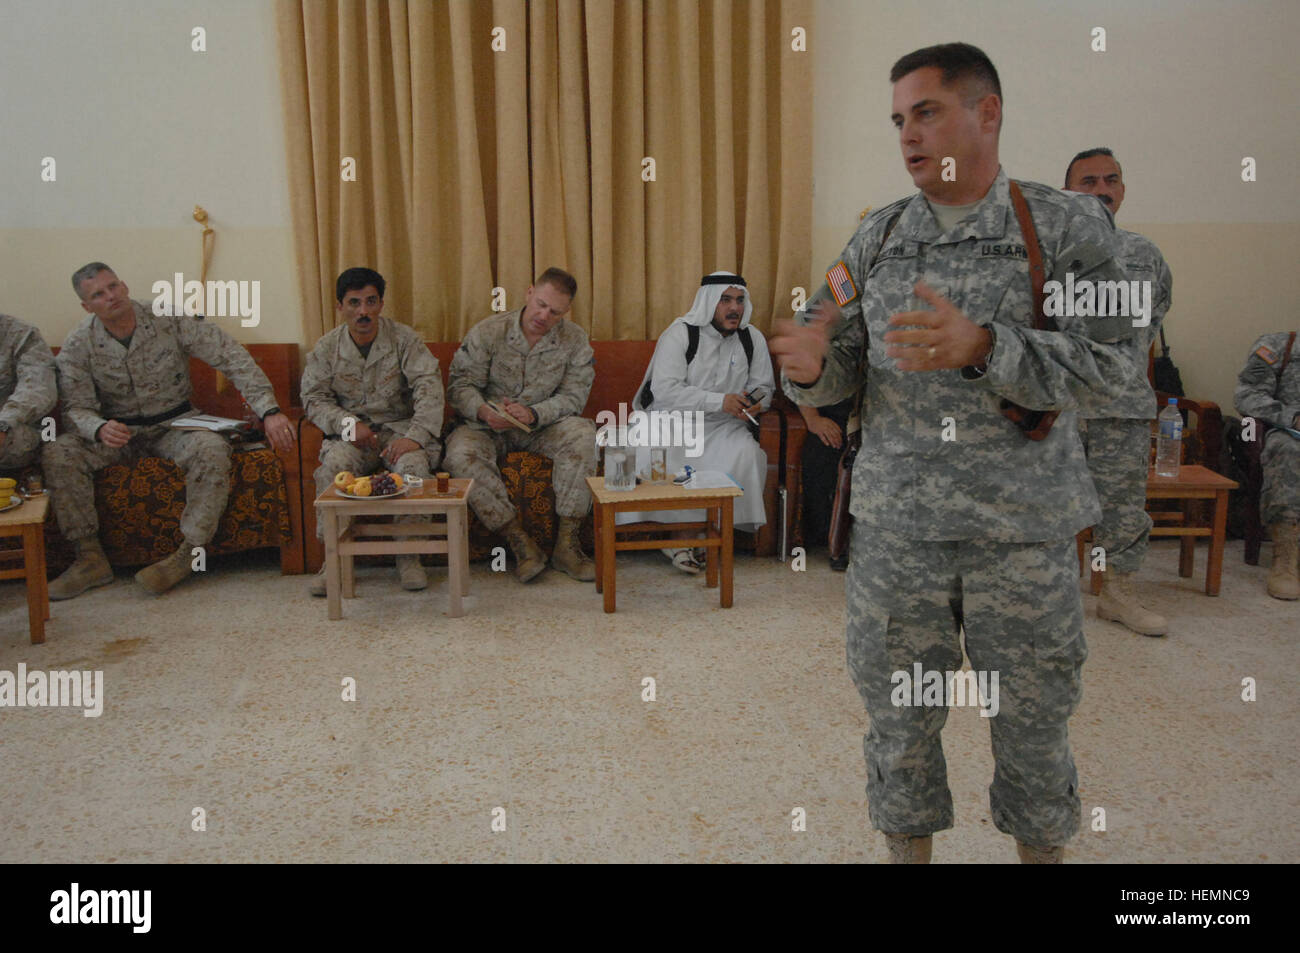 U.S. Army Col. John Charlton attached to 1st Brigade, 3rd Infantry Division, II Marine Expeditionary Force, speaks at a local council meeting attended by local government officials, Iraqi army, and Iraqi police in the city of Ar Ramadi, Iraq, on  Sept. 17. The meeting, held at Sheik Amir Ali Khataub's house, covers issues of city redevelopment as well as current issues on the fight against terrorism. Ar Ramadi meeting 60287 Stock Photo